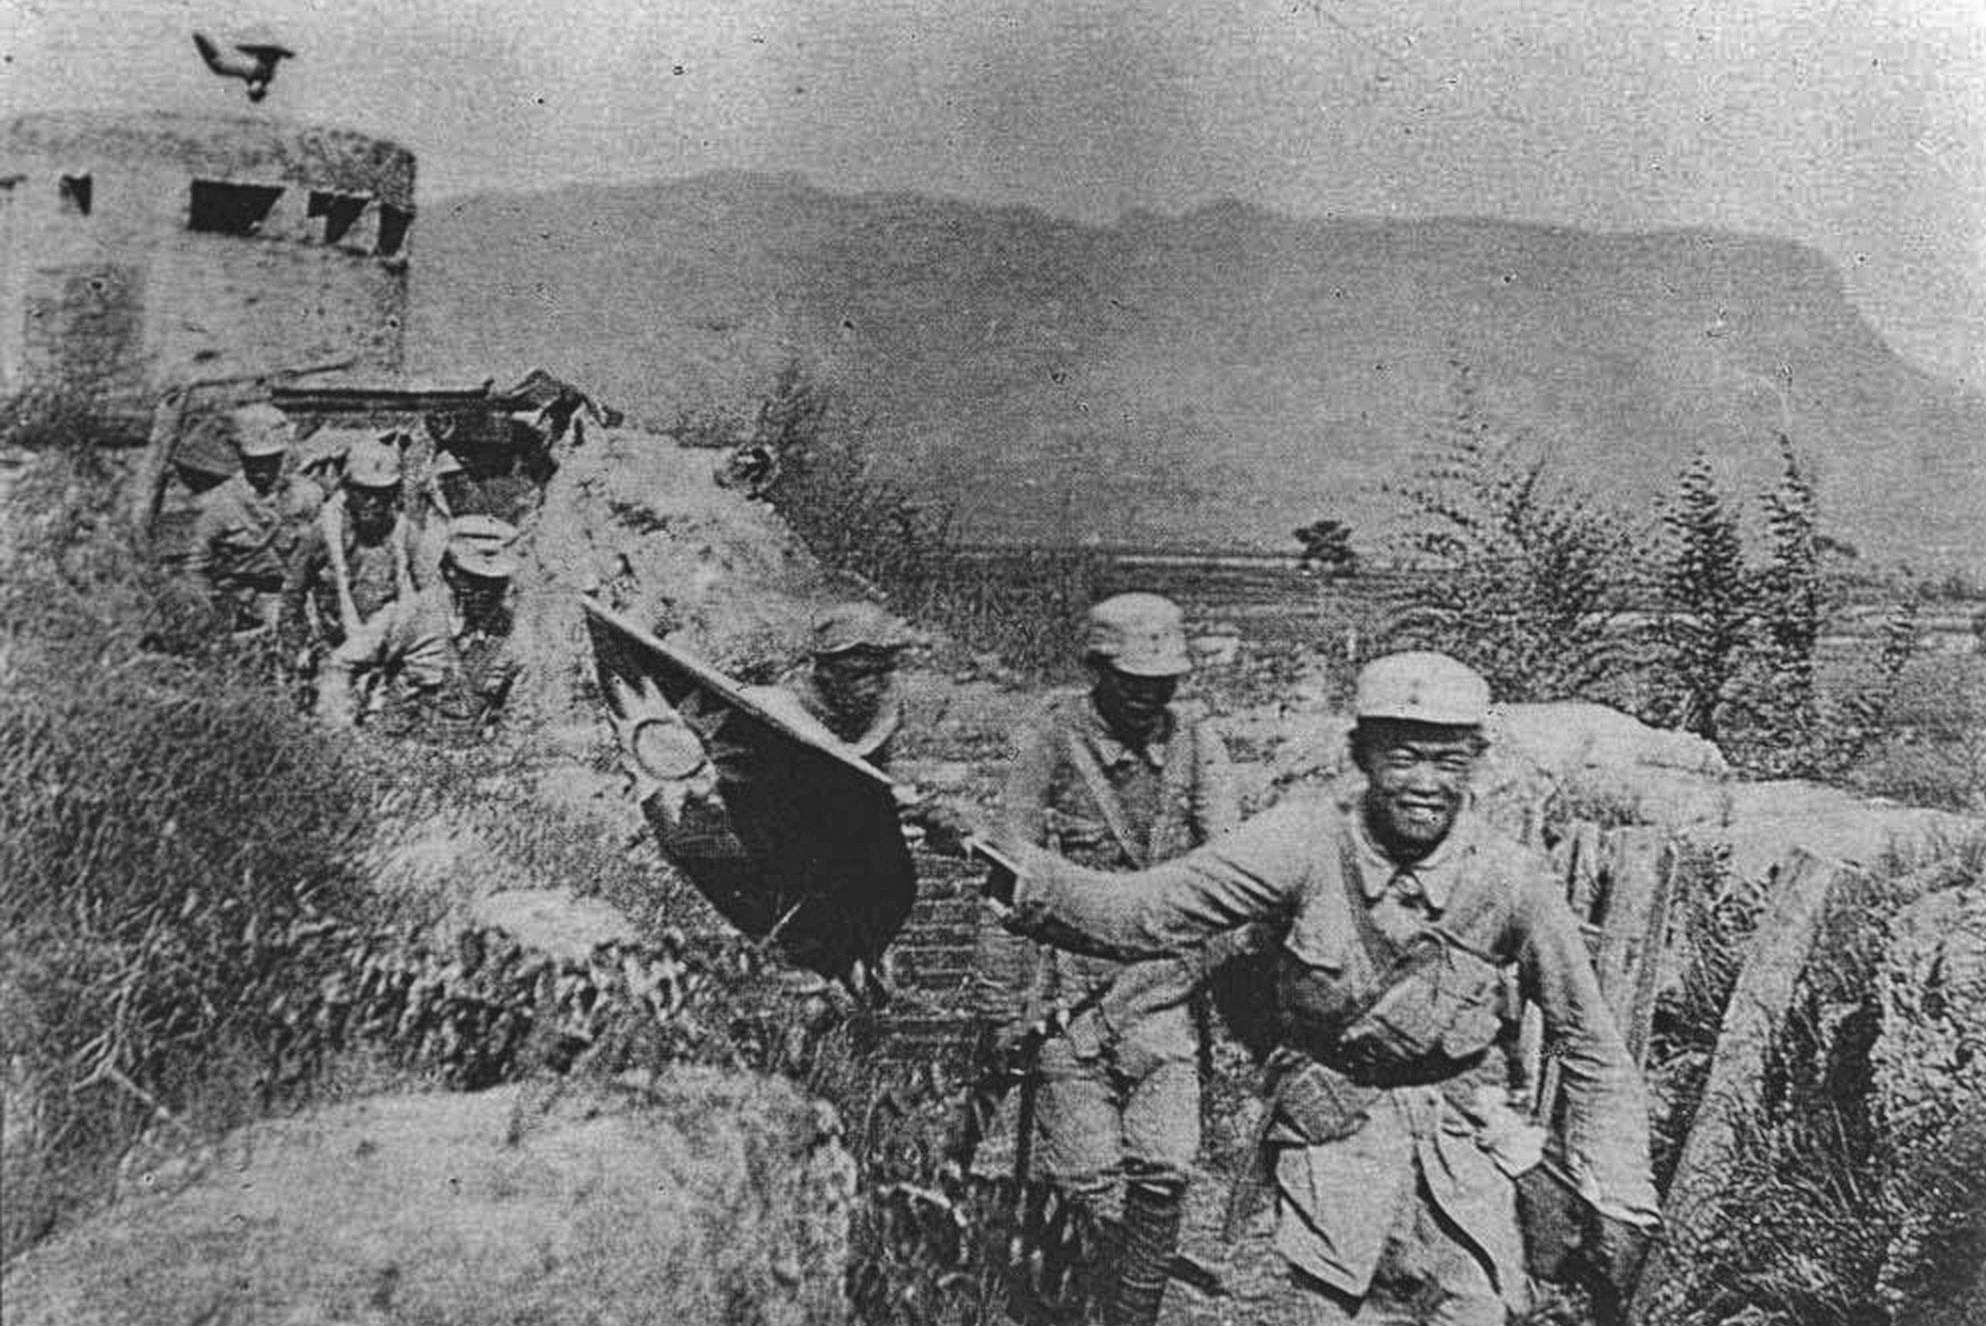 A history buff has pointed out several omissions in a recent book about the Sino-Japanese war. Photo: SCMP Pictures